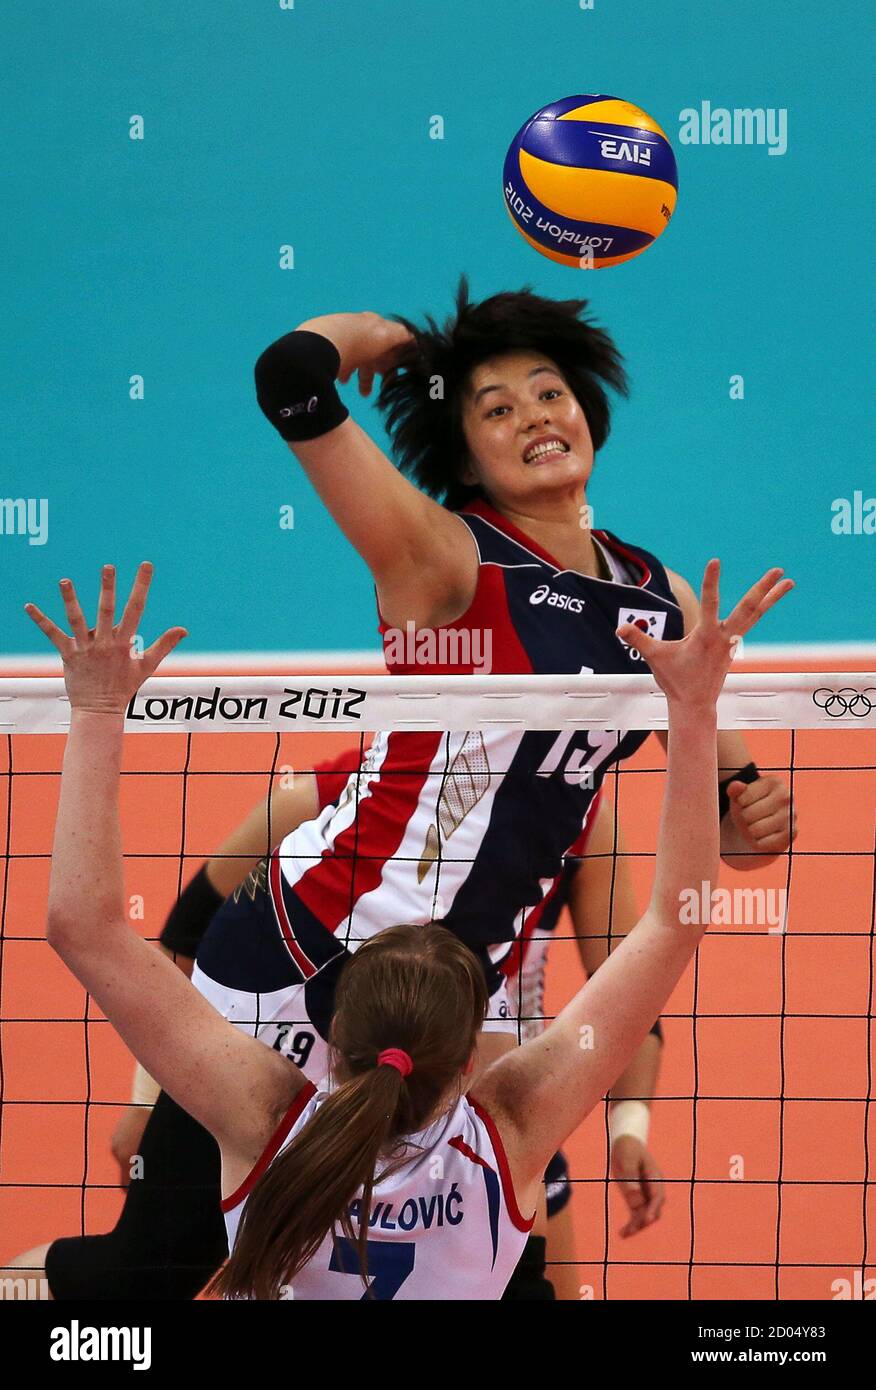 South Korea's Kim Hee-jin (19) prepares to spike the ball as Serbia's  Brankica Mihajlovic blocks during their women's Group B volleyball match at  the London 2012 Olympic Games at Earls Court July